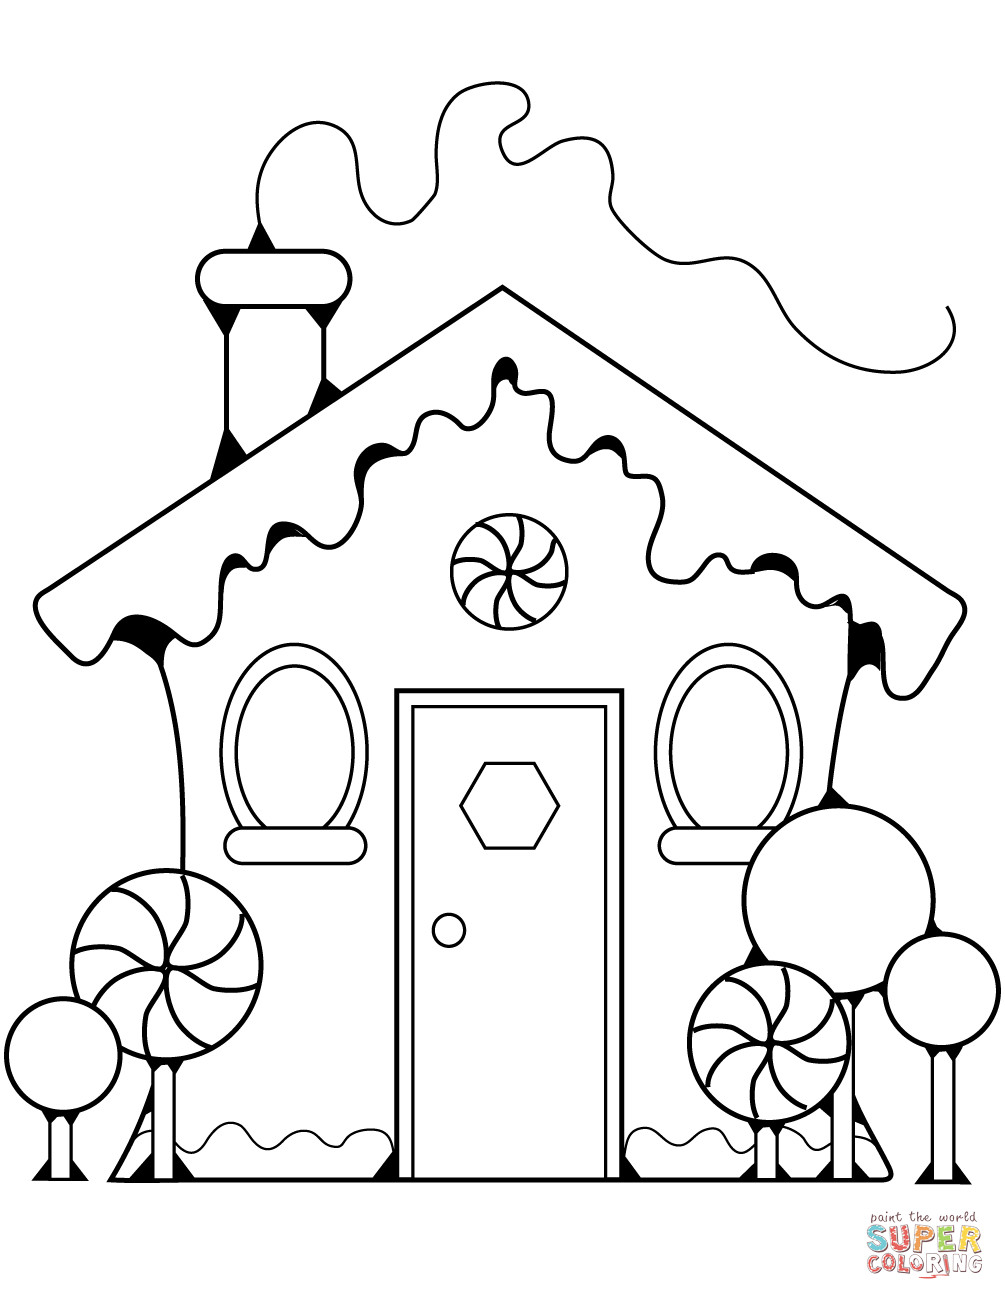 Candy House Coloring Pages For Boys
 Gingerbread House coloring page